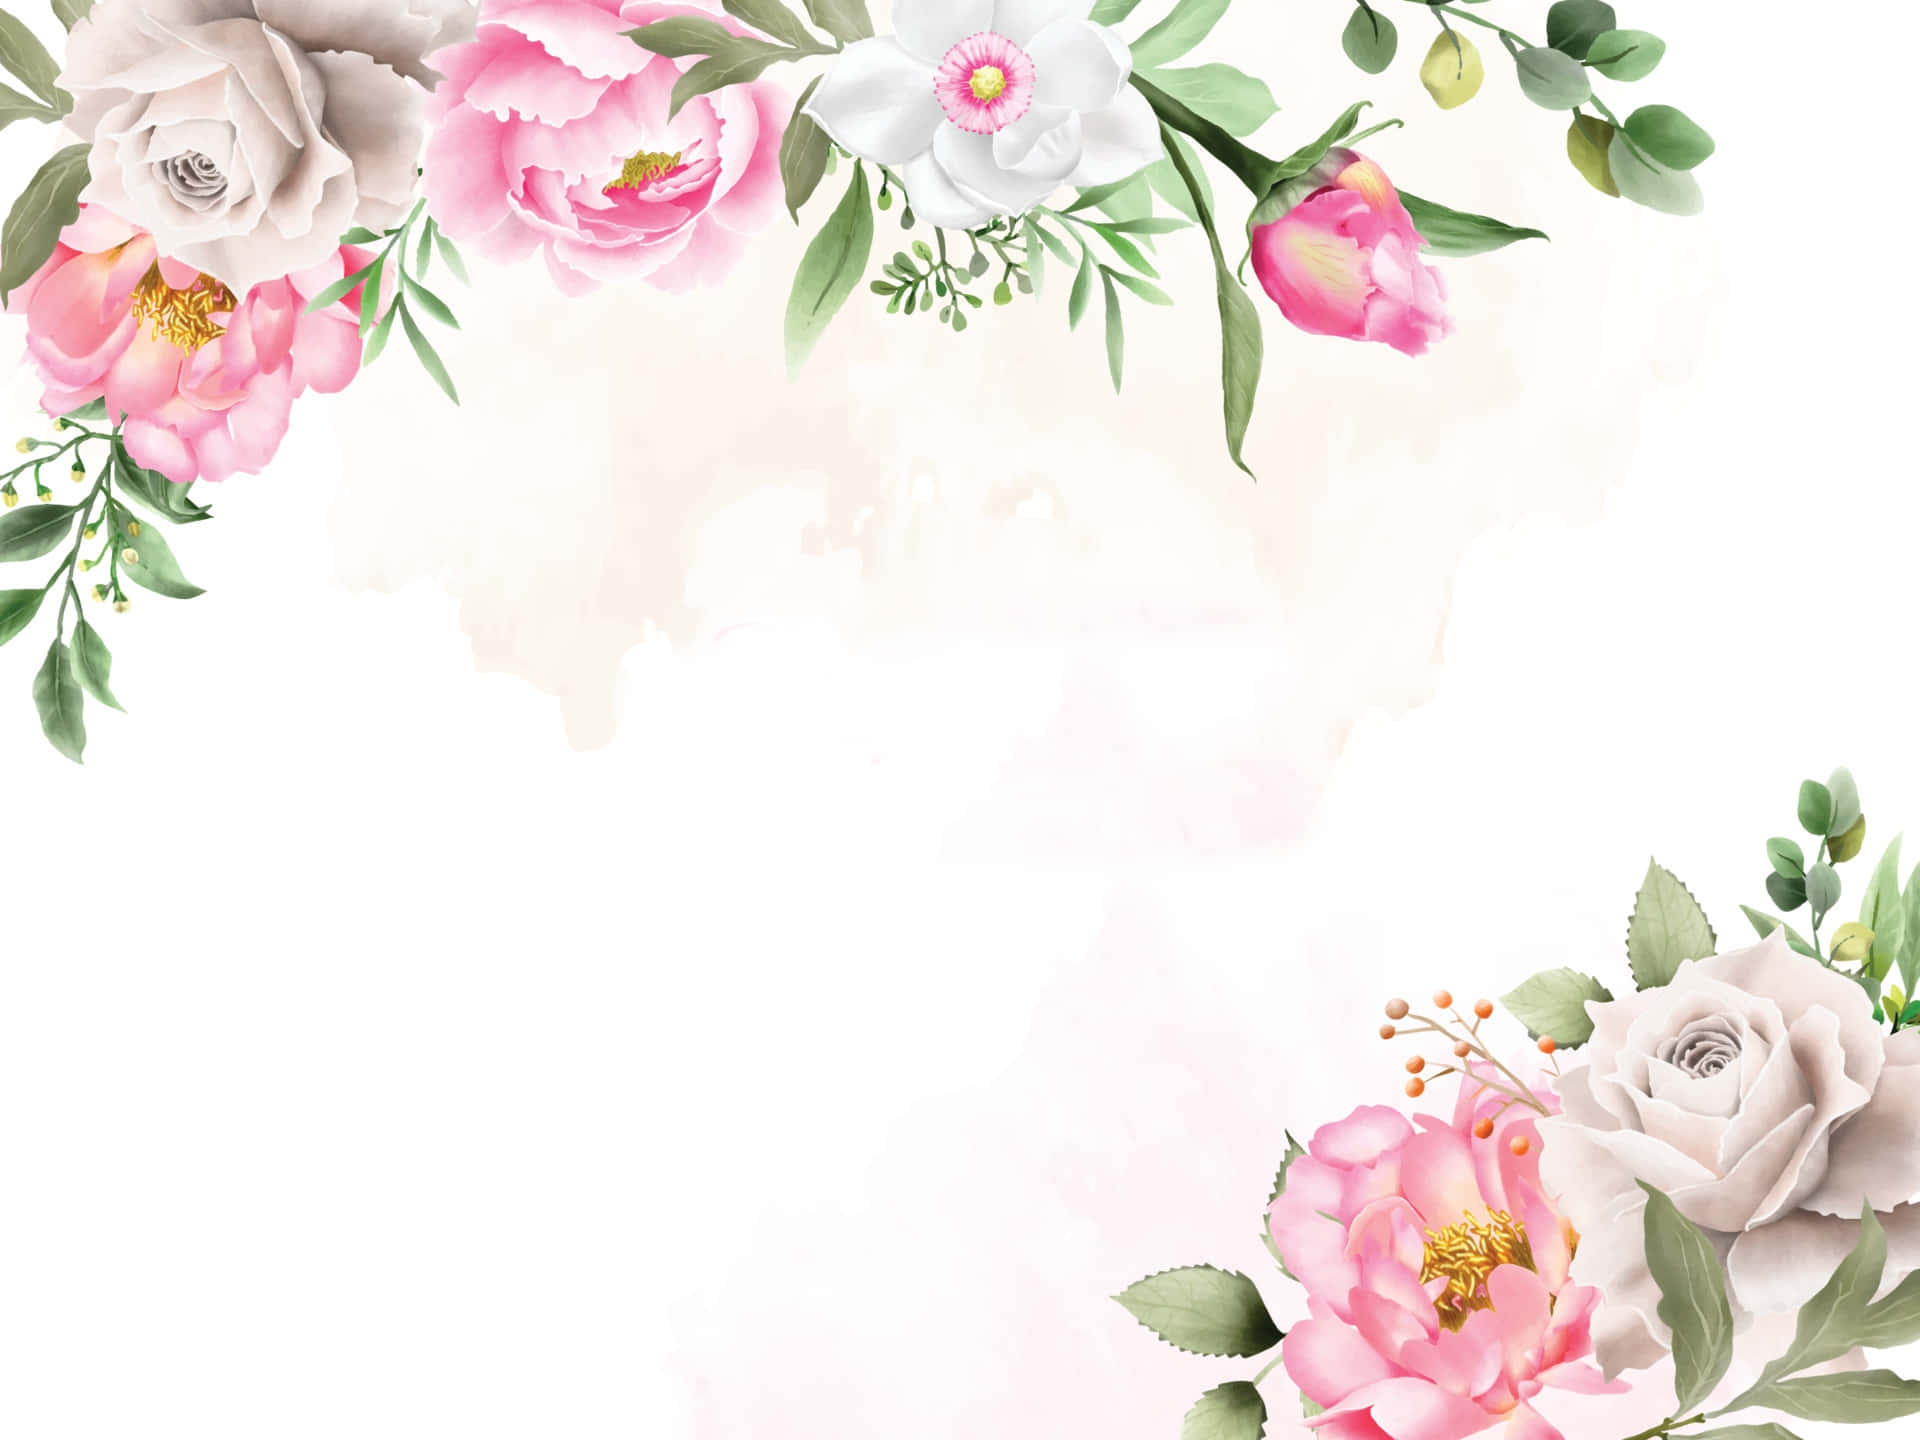 Watercolor Floral Frame With Pink And White Flowers